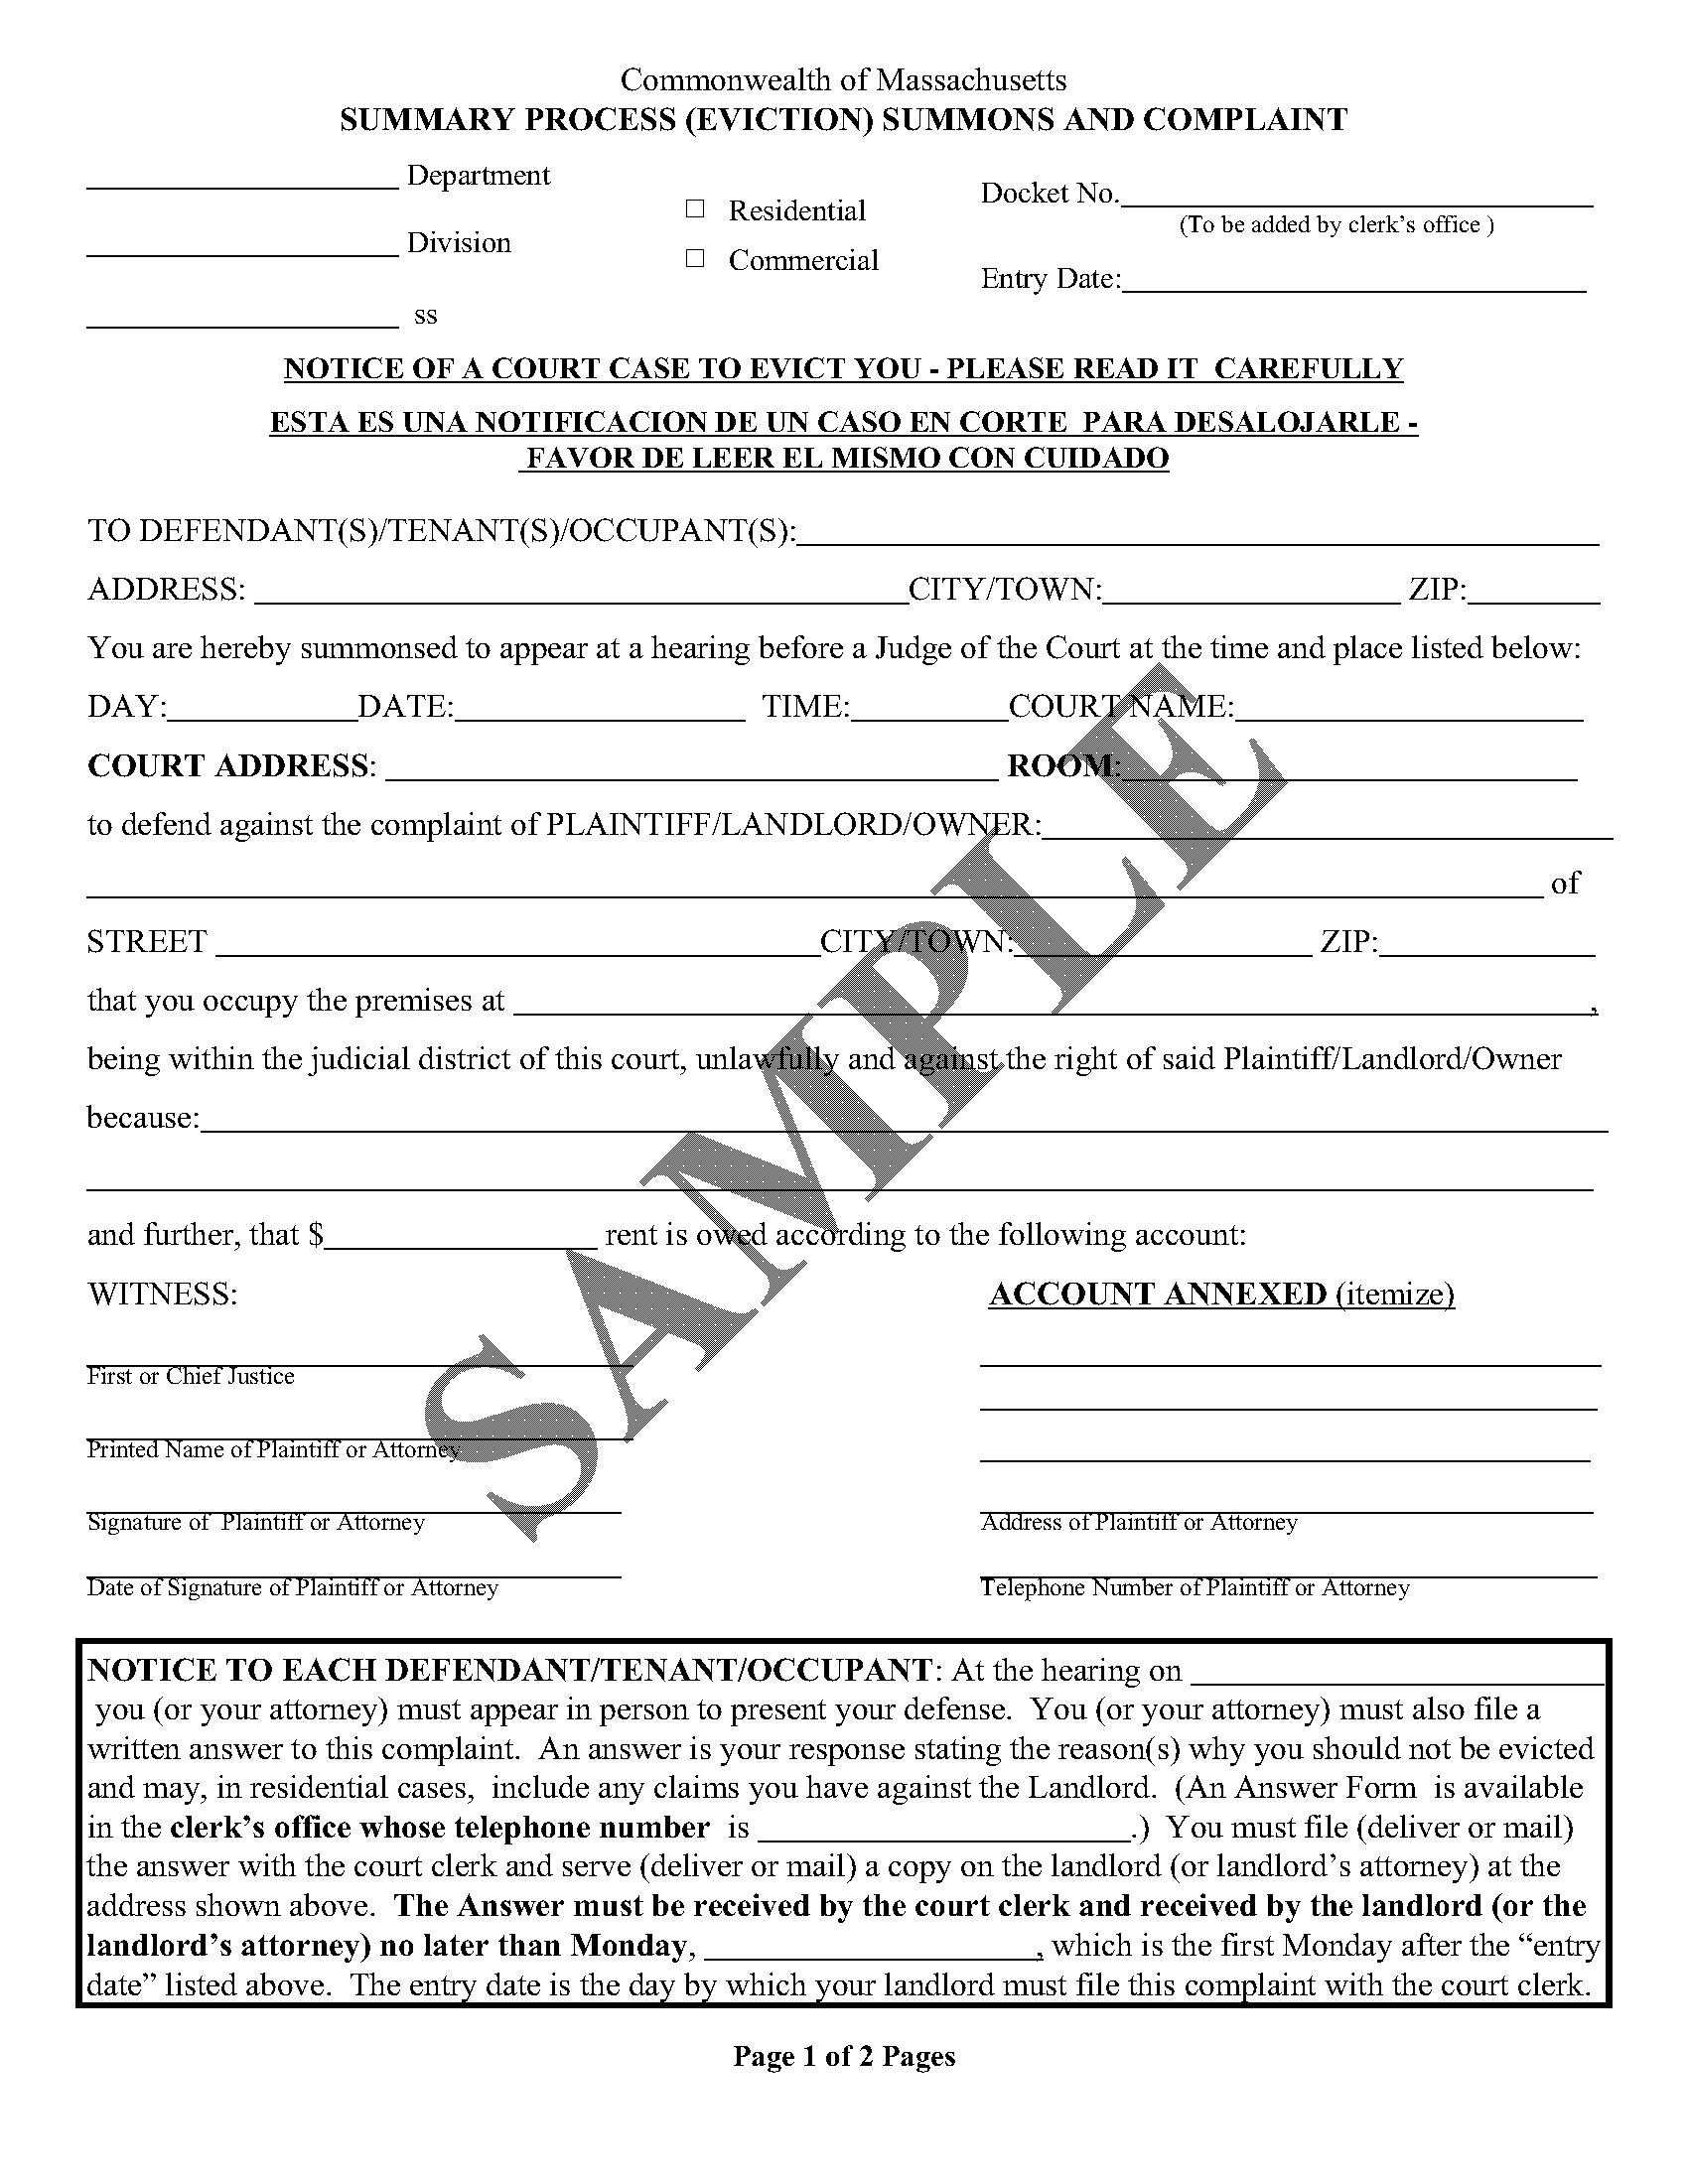 summons_and_complaint